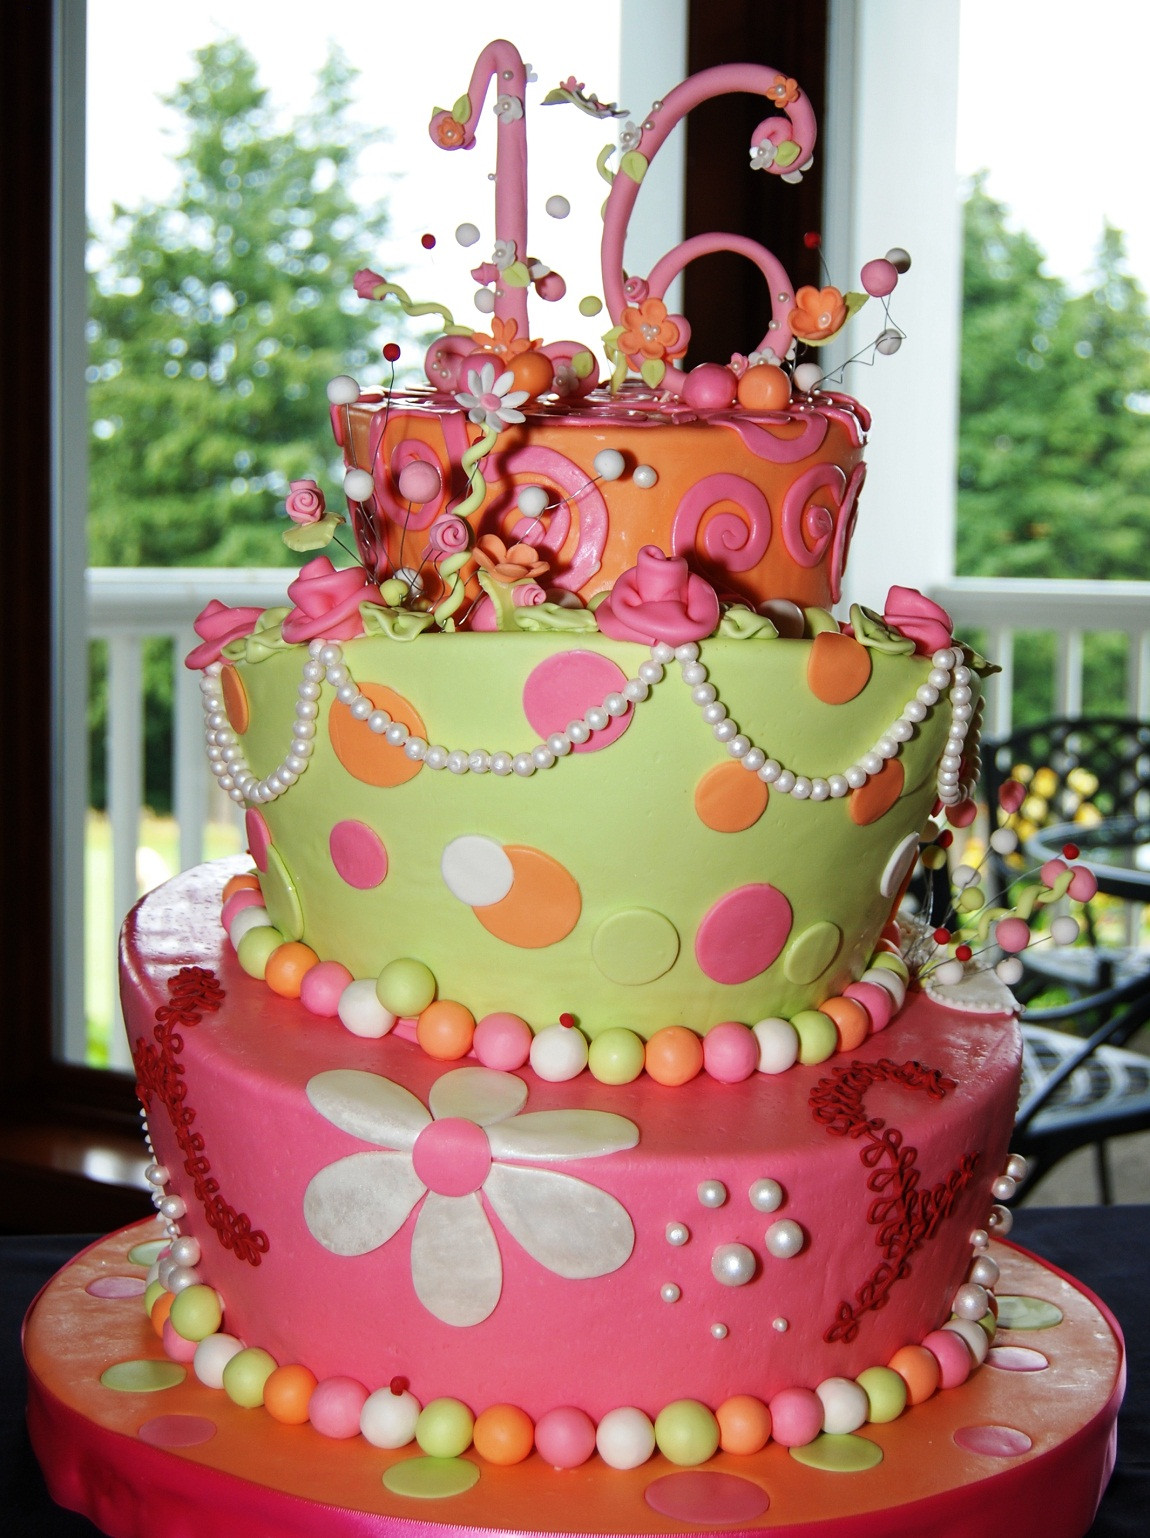 Picture Of Birthday Cake
 Topsy Turvy Cakes – Decoration Ideas